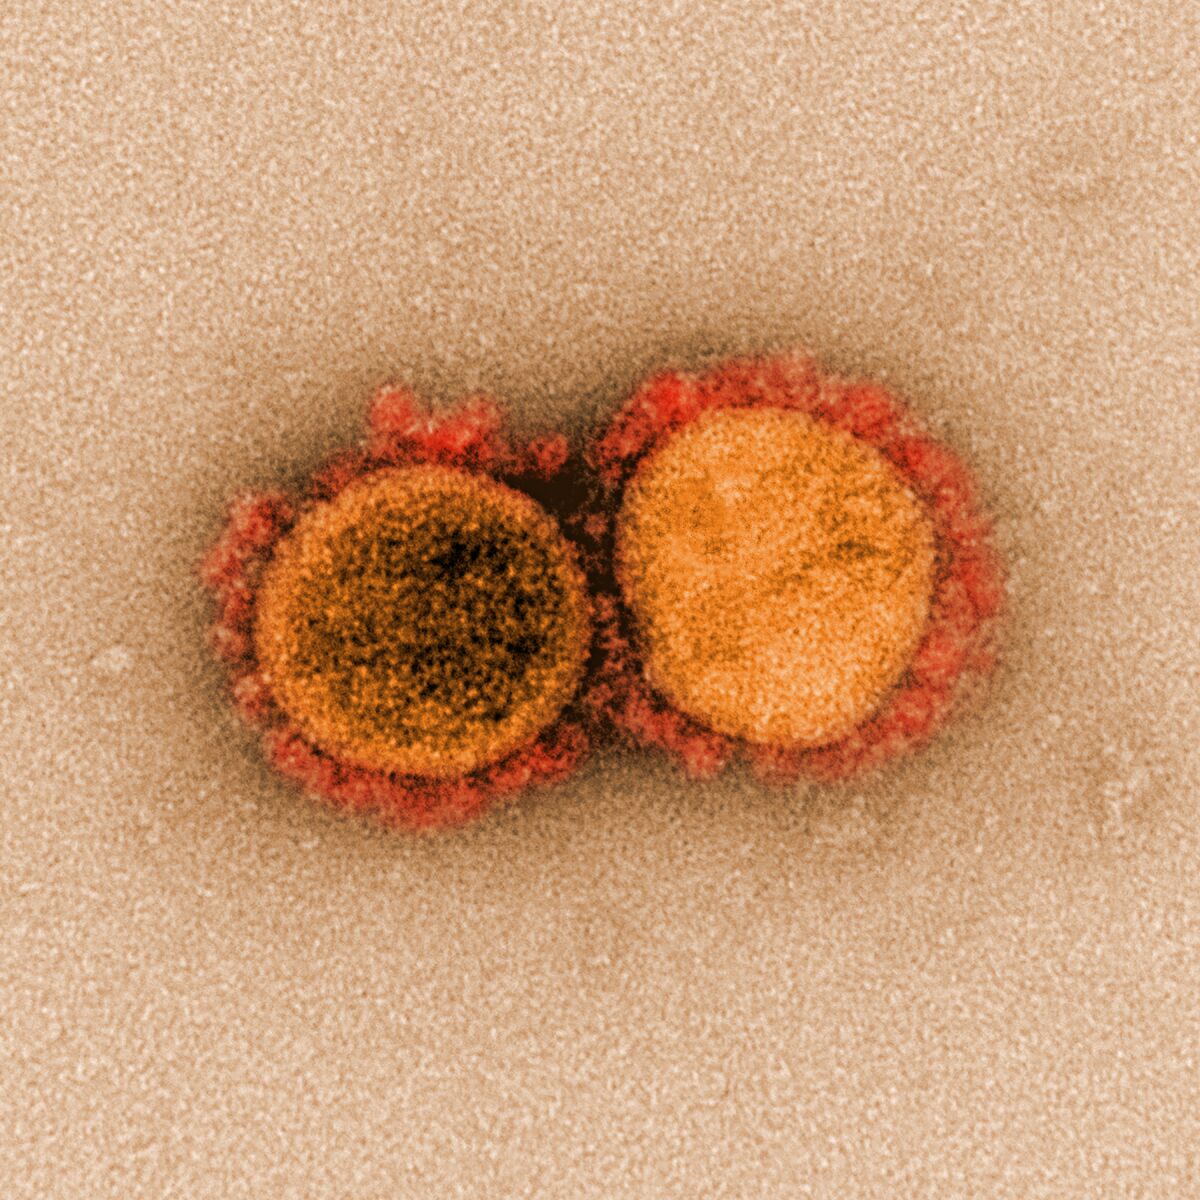 Highly magnified SARS-CoV-2 virus particles 